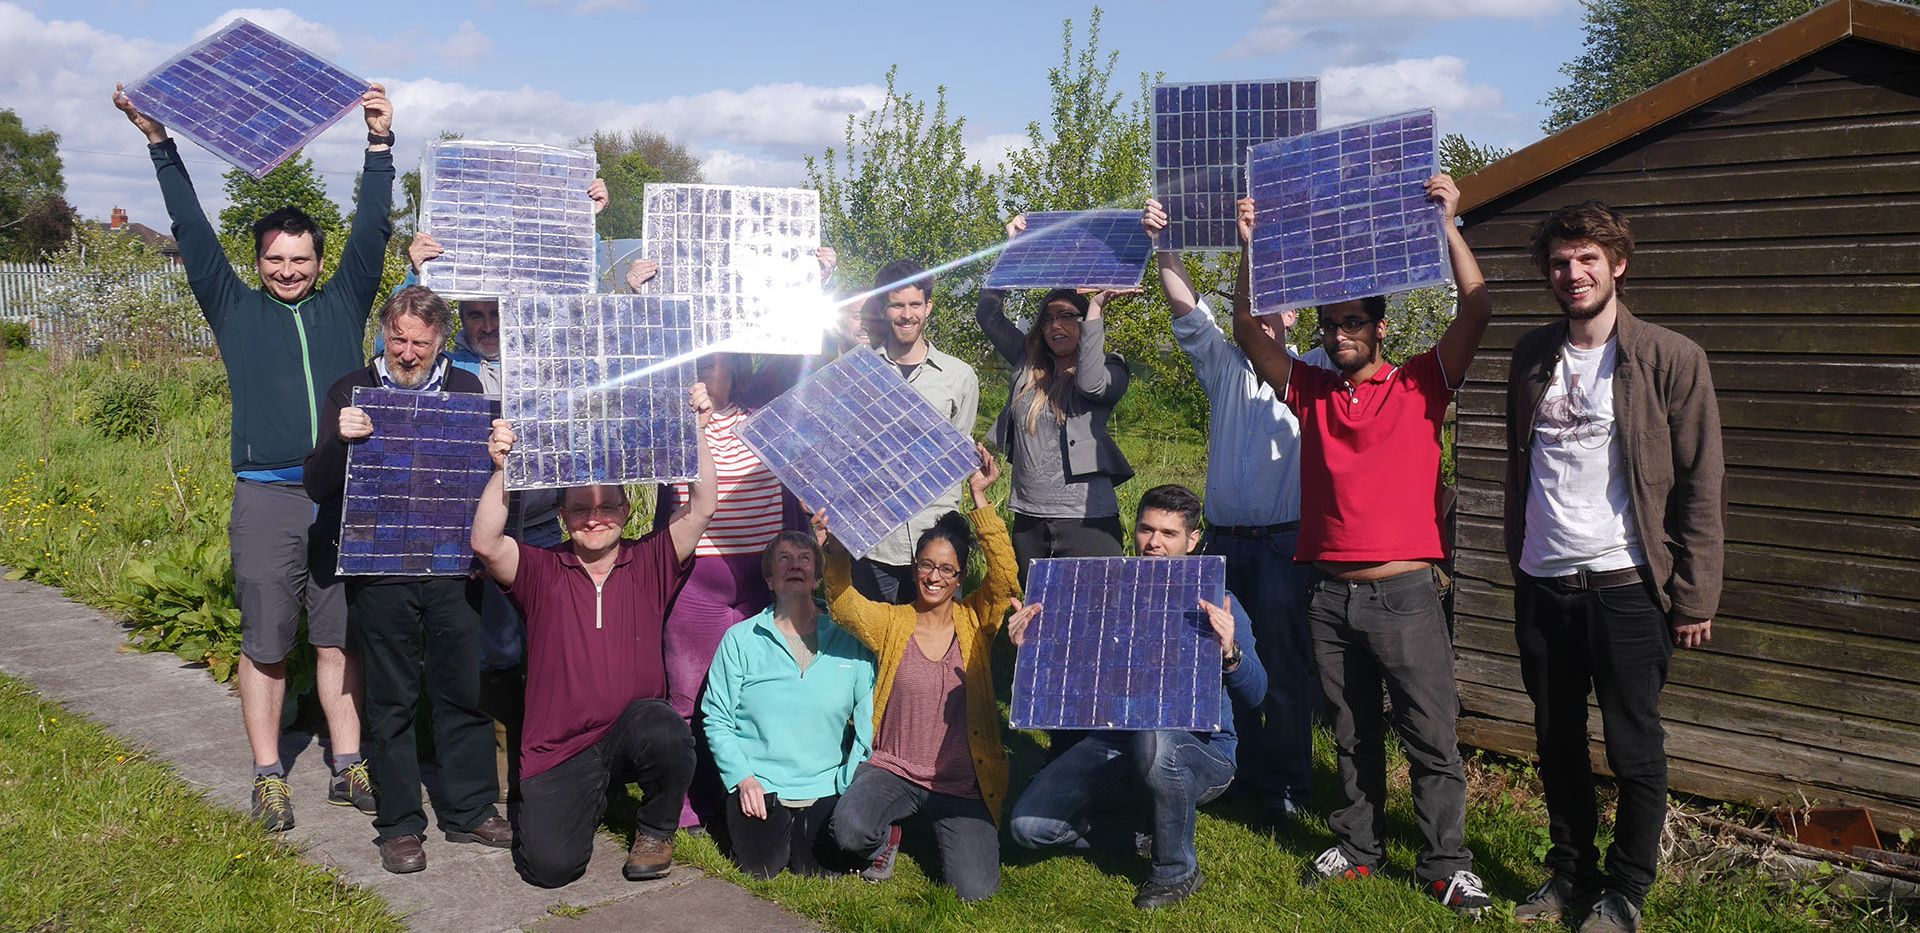 group of ten people of different ages holding solar panels up in the sunlight in a community garden